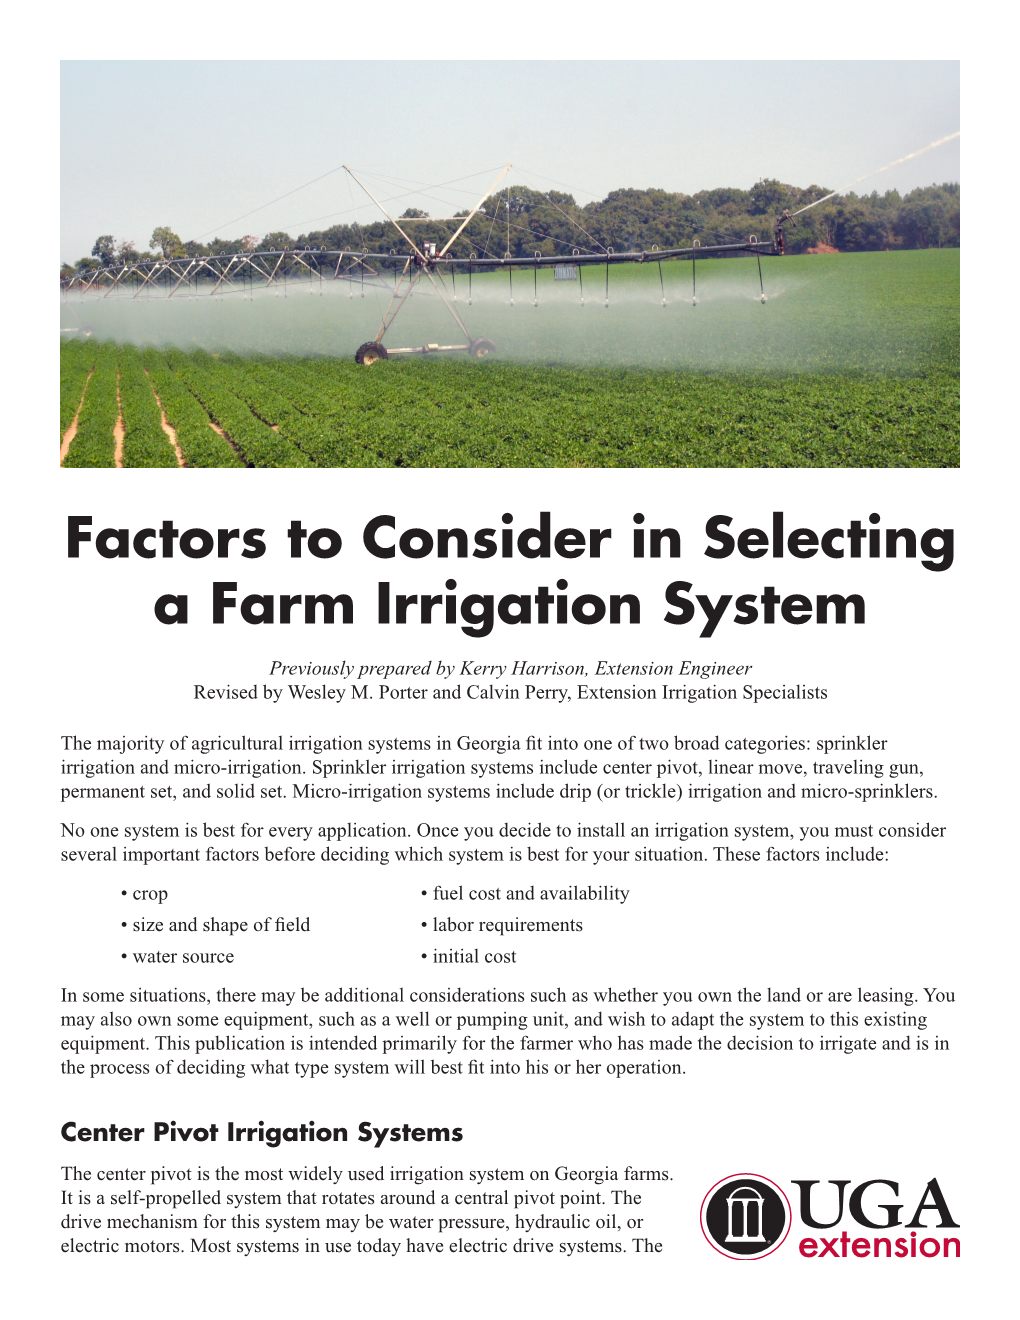 Factors to Consider in Selecting a Farm Irrigation System